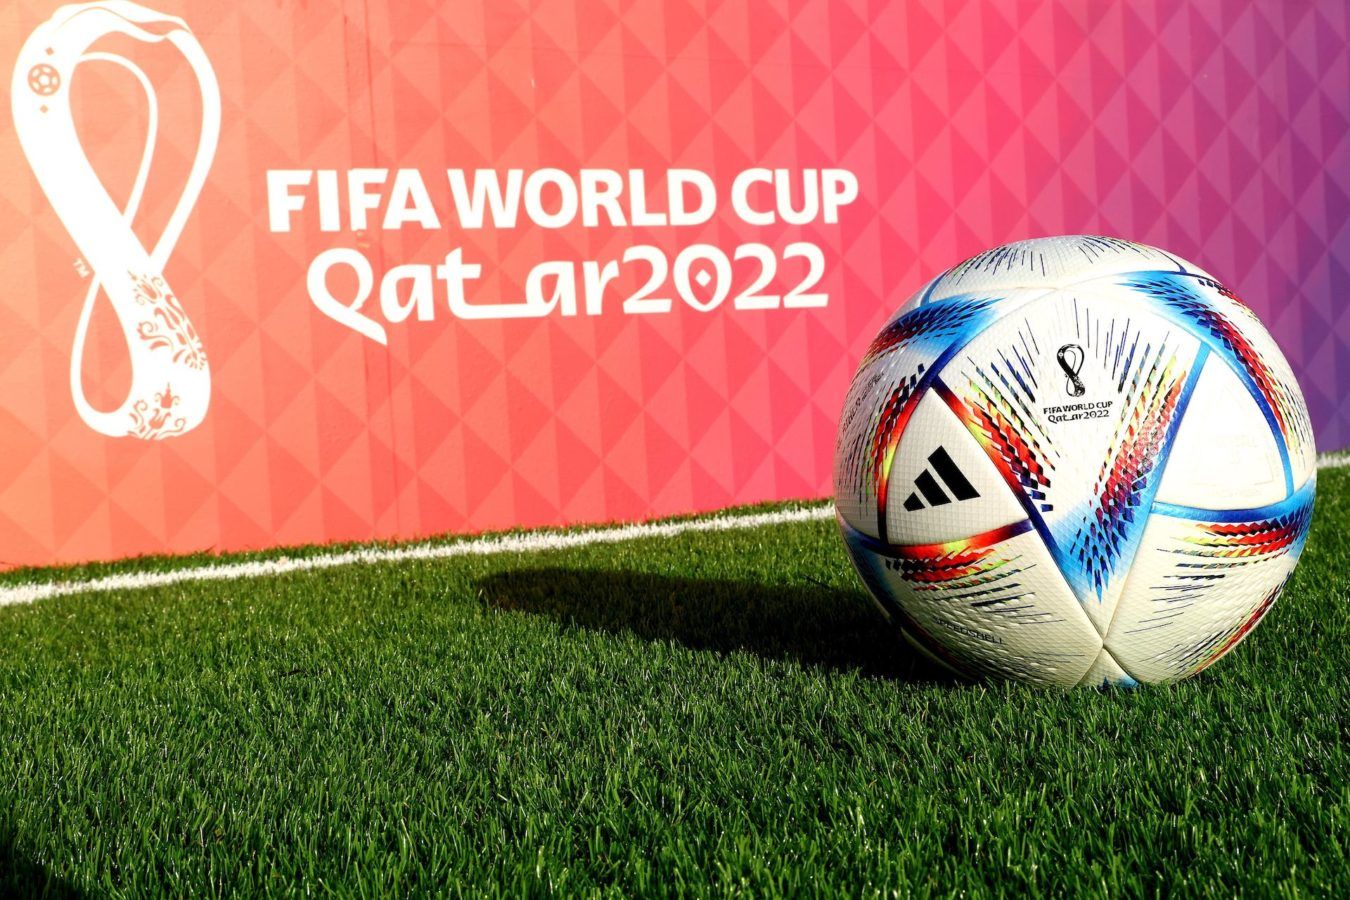 What to expect at tonight’s FIFA World Cup Qatar 2022 draw